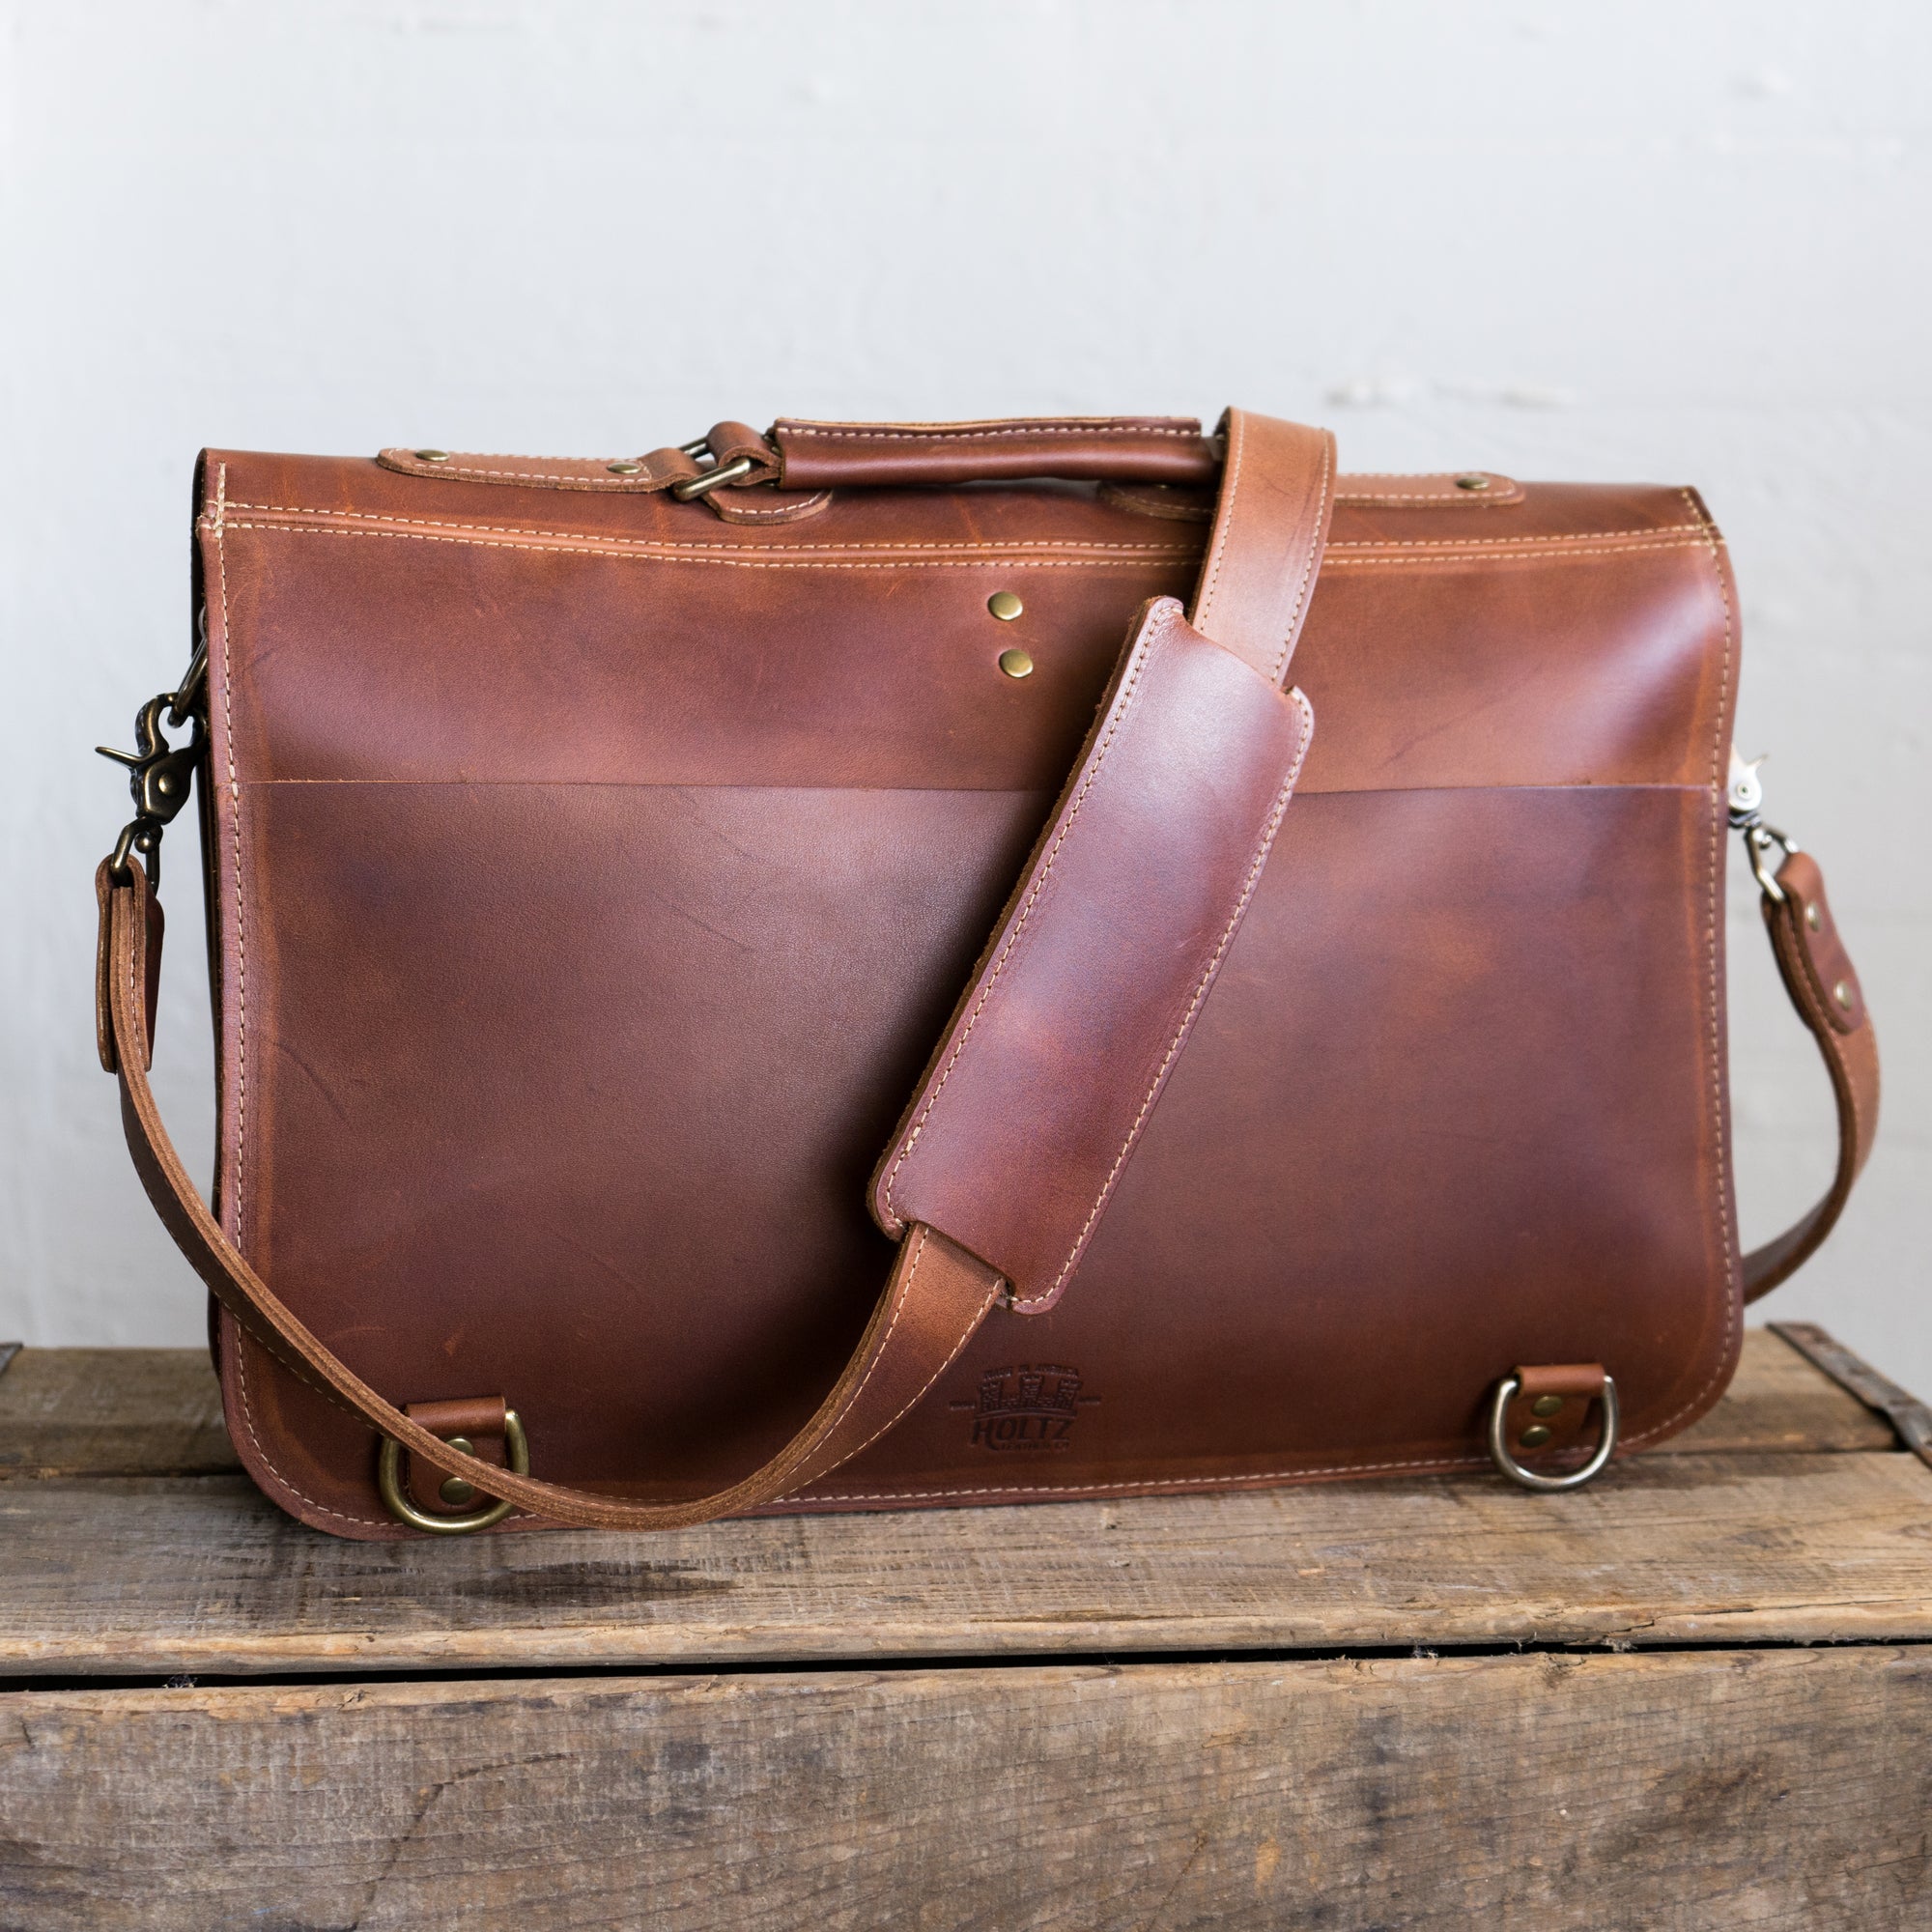 Leather messenger bag/briefcase with buckles from Holtz Leather Co in Huntsville, Alabama